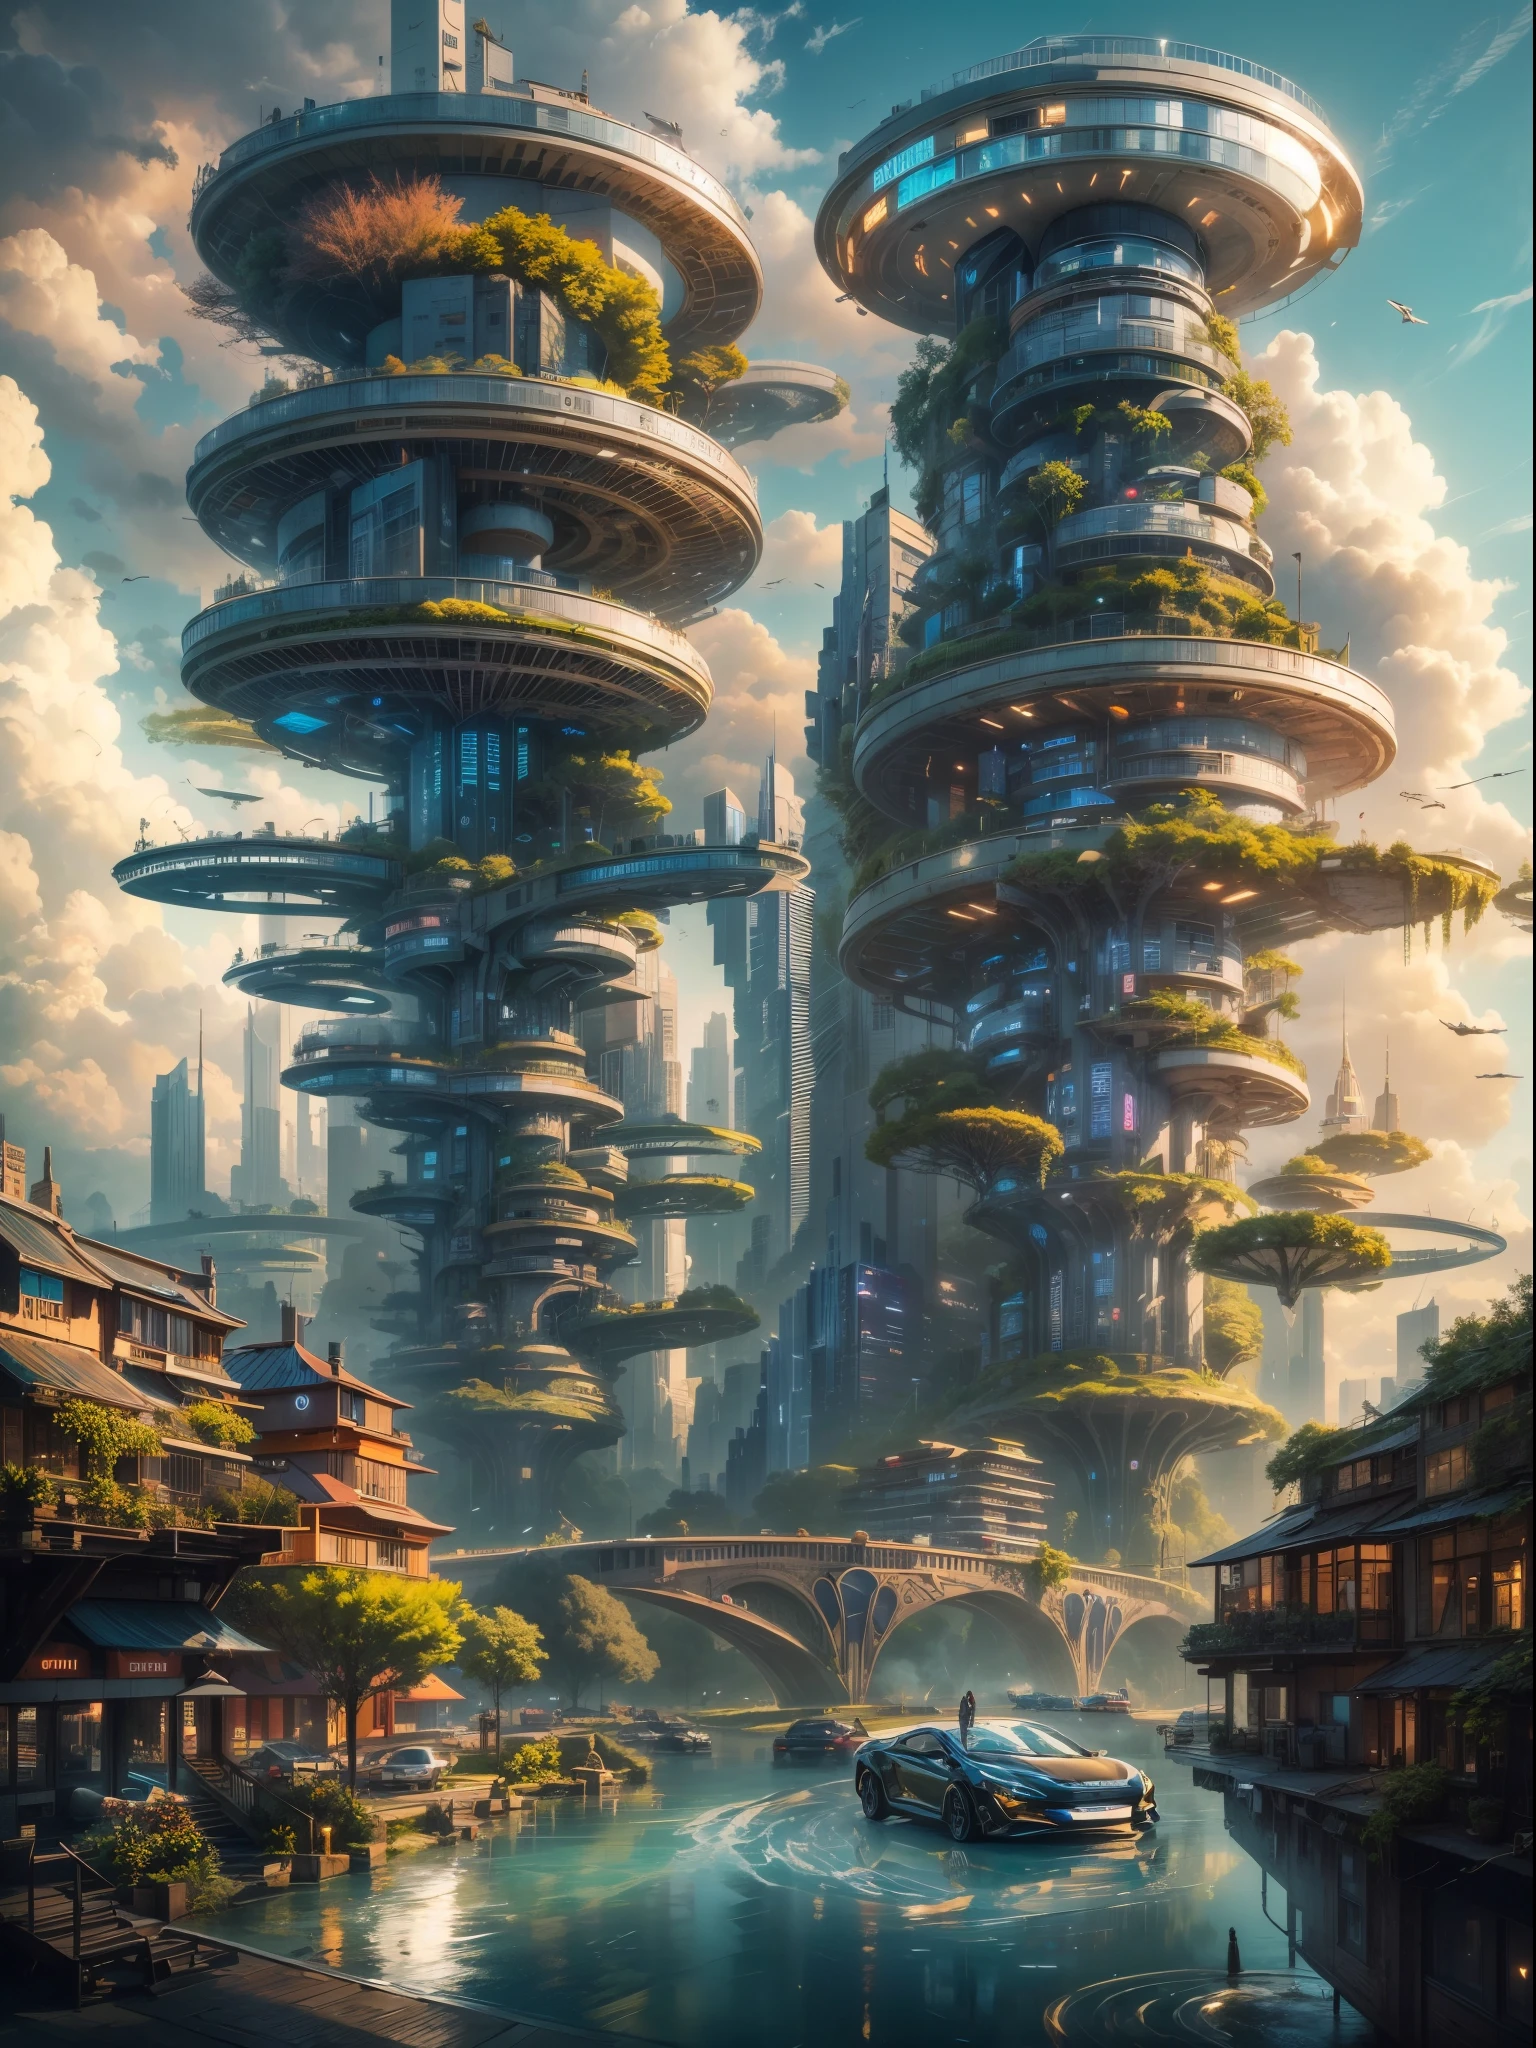 (best quality,4k,8k,highres,masterpiece:1.2),ultra-detailed,(realistic,photorealistic,photo-realistic:1.37), BREAK,futuristic floating city,futuristic technology,city on a gigantic high-tech flat platform,airship,floating in the sky,futuristic city,small airship around,high-tech half-sphere platform,colorful lights,advanced architecture,modern buildings,skyscrapers,reaching the clouds,awe-inspiring view,urban landscape,impressive design,seamless integration with nature,dynamic and vibrant atmosphere BREAK futuristic transport system,hovering vehicles,transparent pathways,lush greenery,hanging gardens,cascading waterfalls,magnificent skyline,reflection on the water,sparkling river,architectural innovation,futuristic skyscrapers,transparent domes,unusual shaped buildings,elevated walkways,impressive skyline,glowing lights,futuristic technology,minimalist design,scenic viewpoints,panoramic view,cloud-piercing towers, BREAK vibrant colors,epic sunrise,epic sunset,dazzling display of lights,magical ambiance,city of the future,urban utopia,luxurious lifestyle,innovative energy sources,sustainable development,smart city technology,advanced infrastructure,tranquil atmosphere,harmonious coexistence of nature and technology,awe-inspiring cityscape,unprecedented urban planning,seamless connection between buildings and nature,high-tech metropolis,cutting-edge engineering marvels,future of urban living,visionary architectural concepts,energy-efficient buildings,harmony with the environment BREAK,city floating above the clouds,utopian dreams turned reality,limitless possibilities,advanced transportation network,green energy integration,innovative materials,impressive holographic displays,advanced communication systems,breathtaking aerial views,peaceful and serene surroundings,modernist aesthetics,ethereal beauty